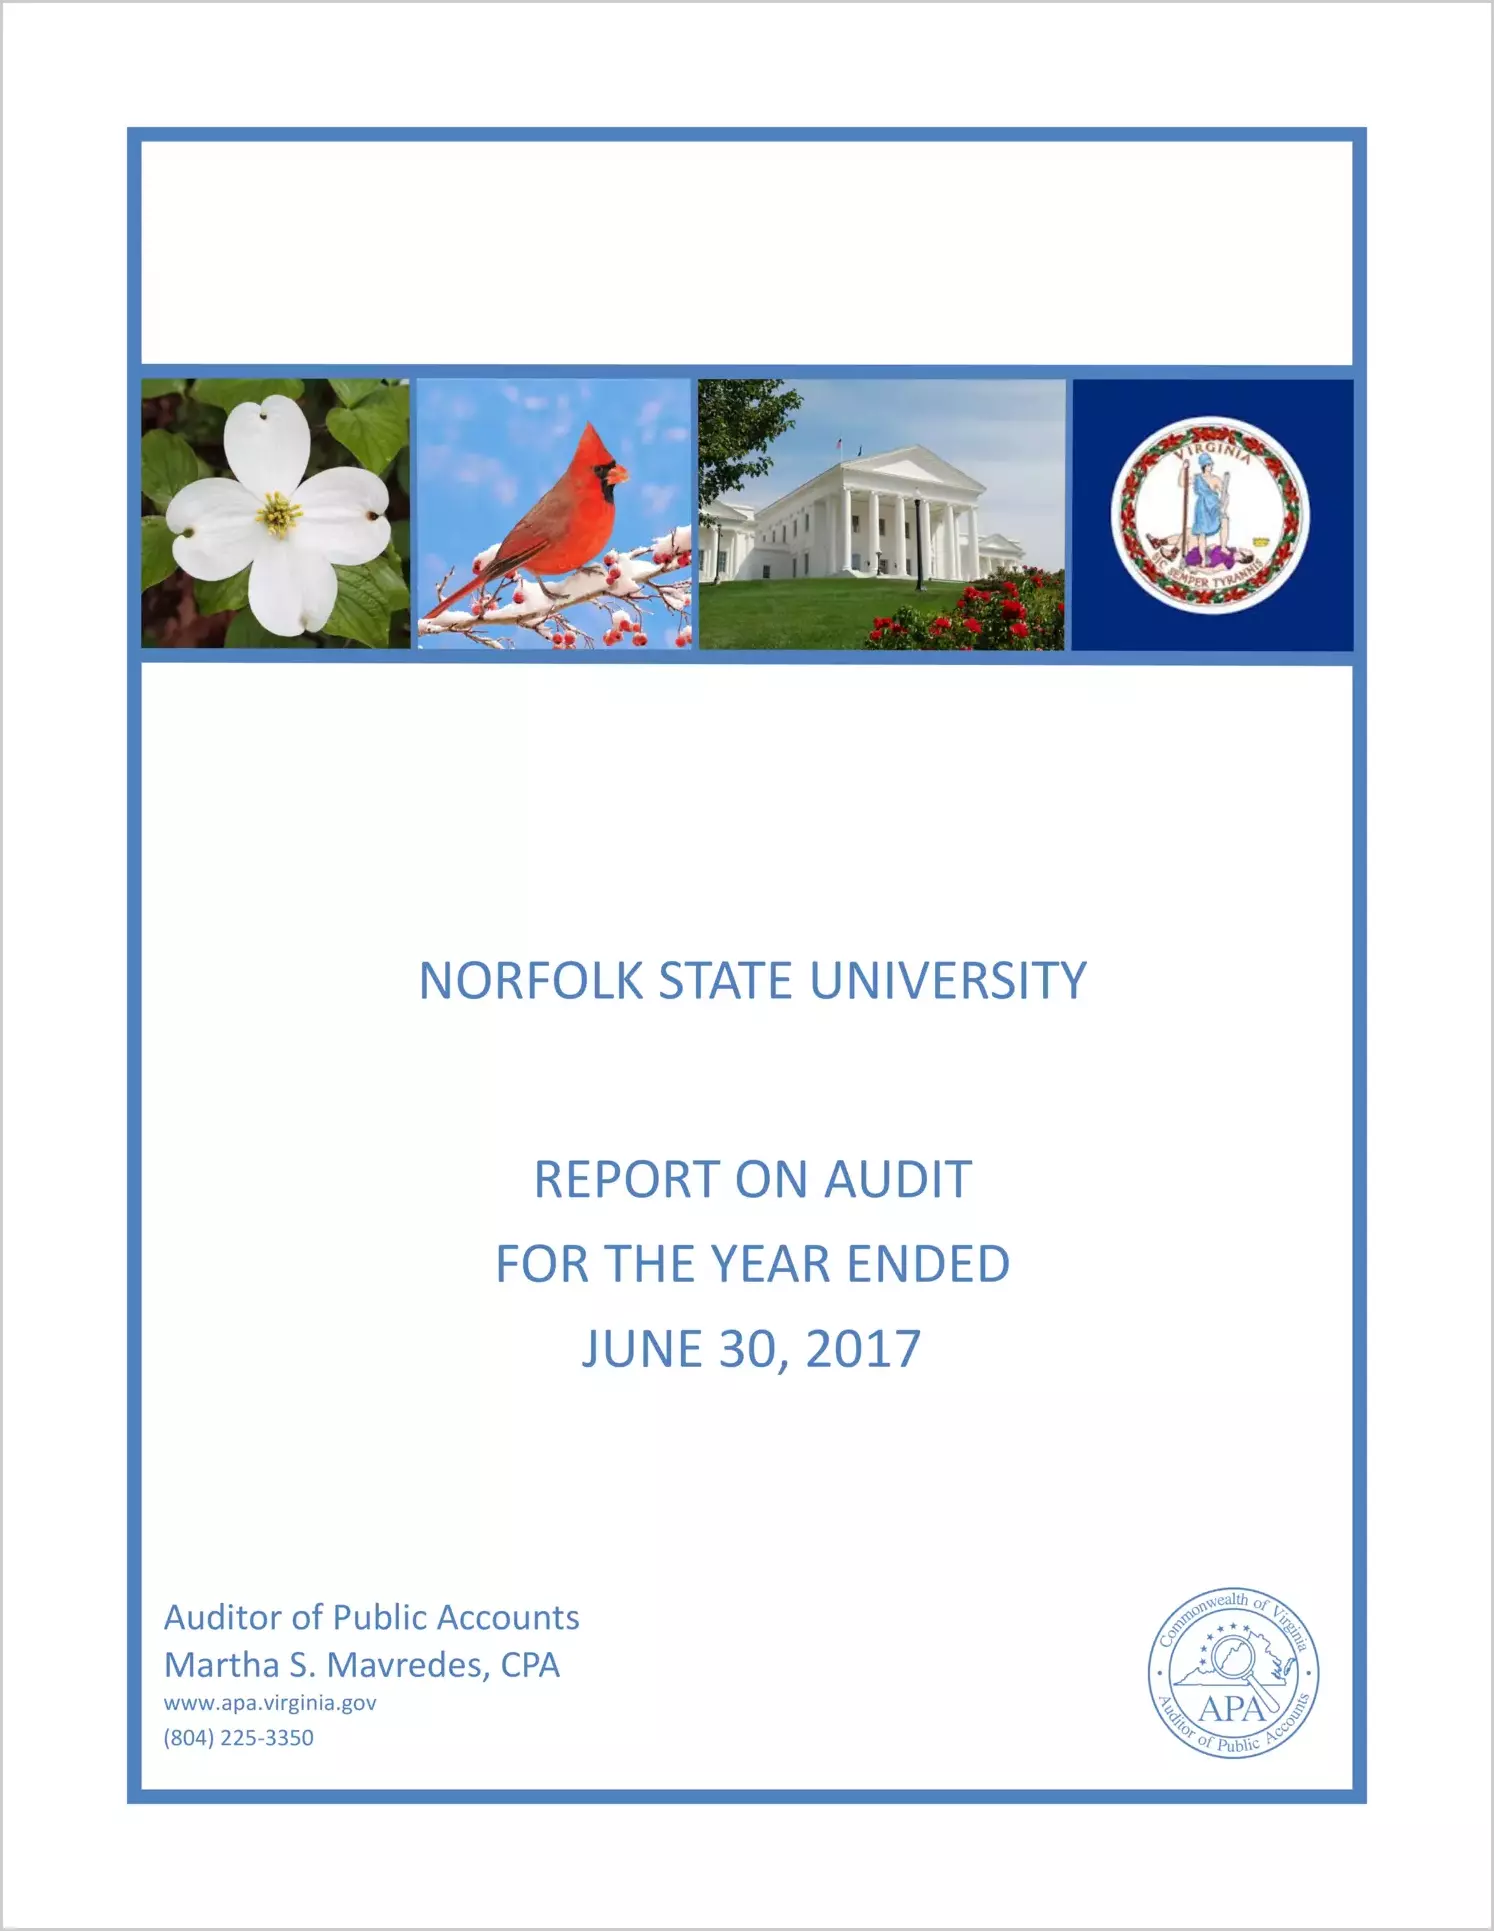 Norfolk State University for the year ended June 30, 2017